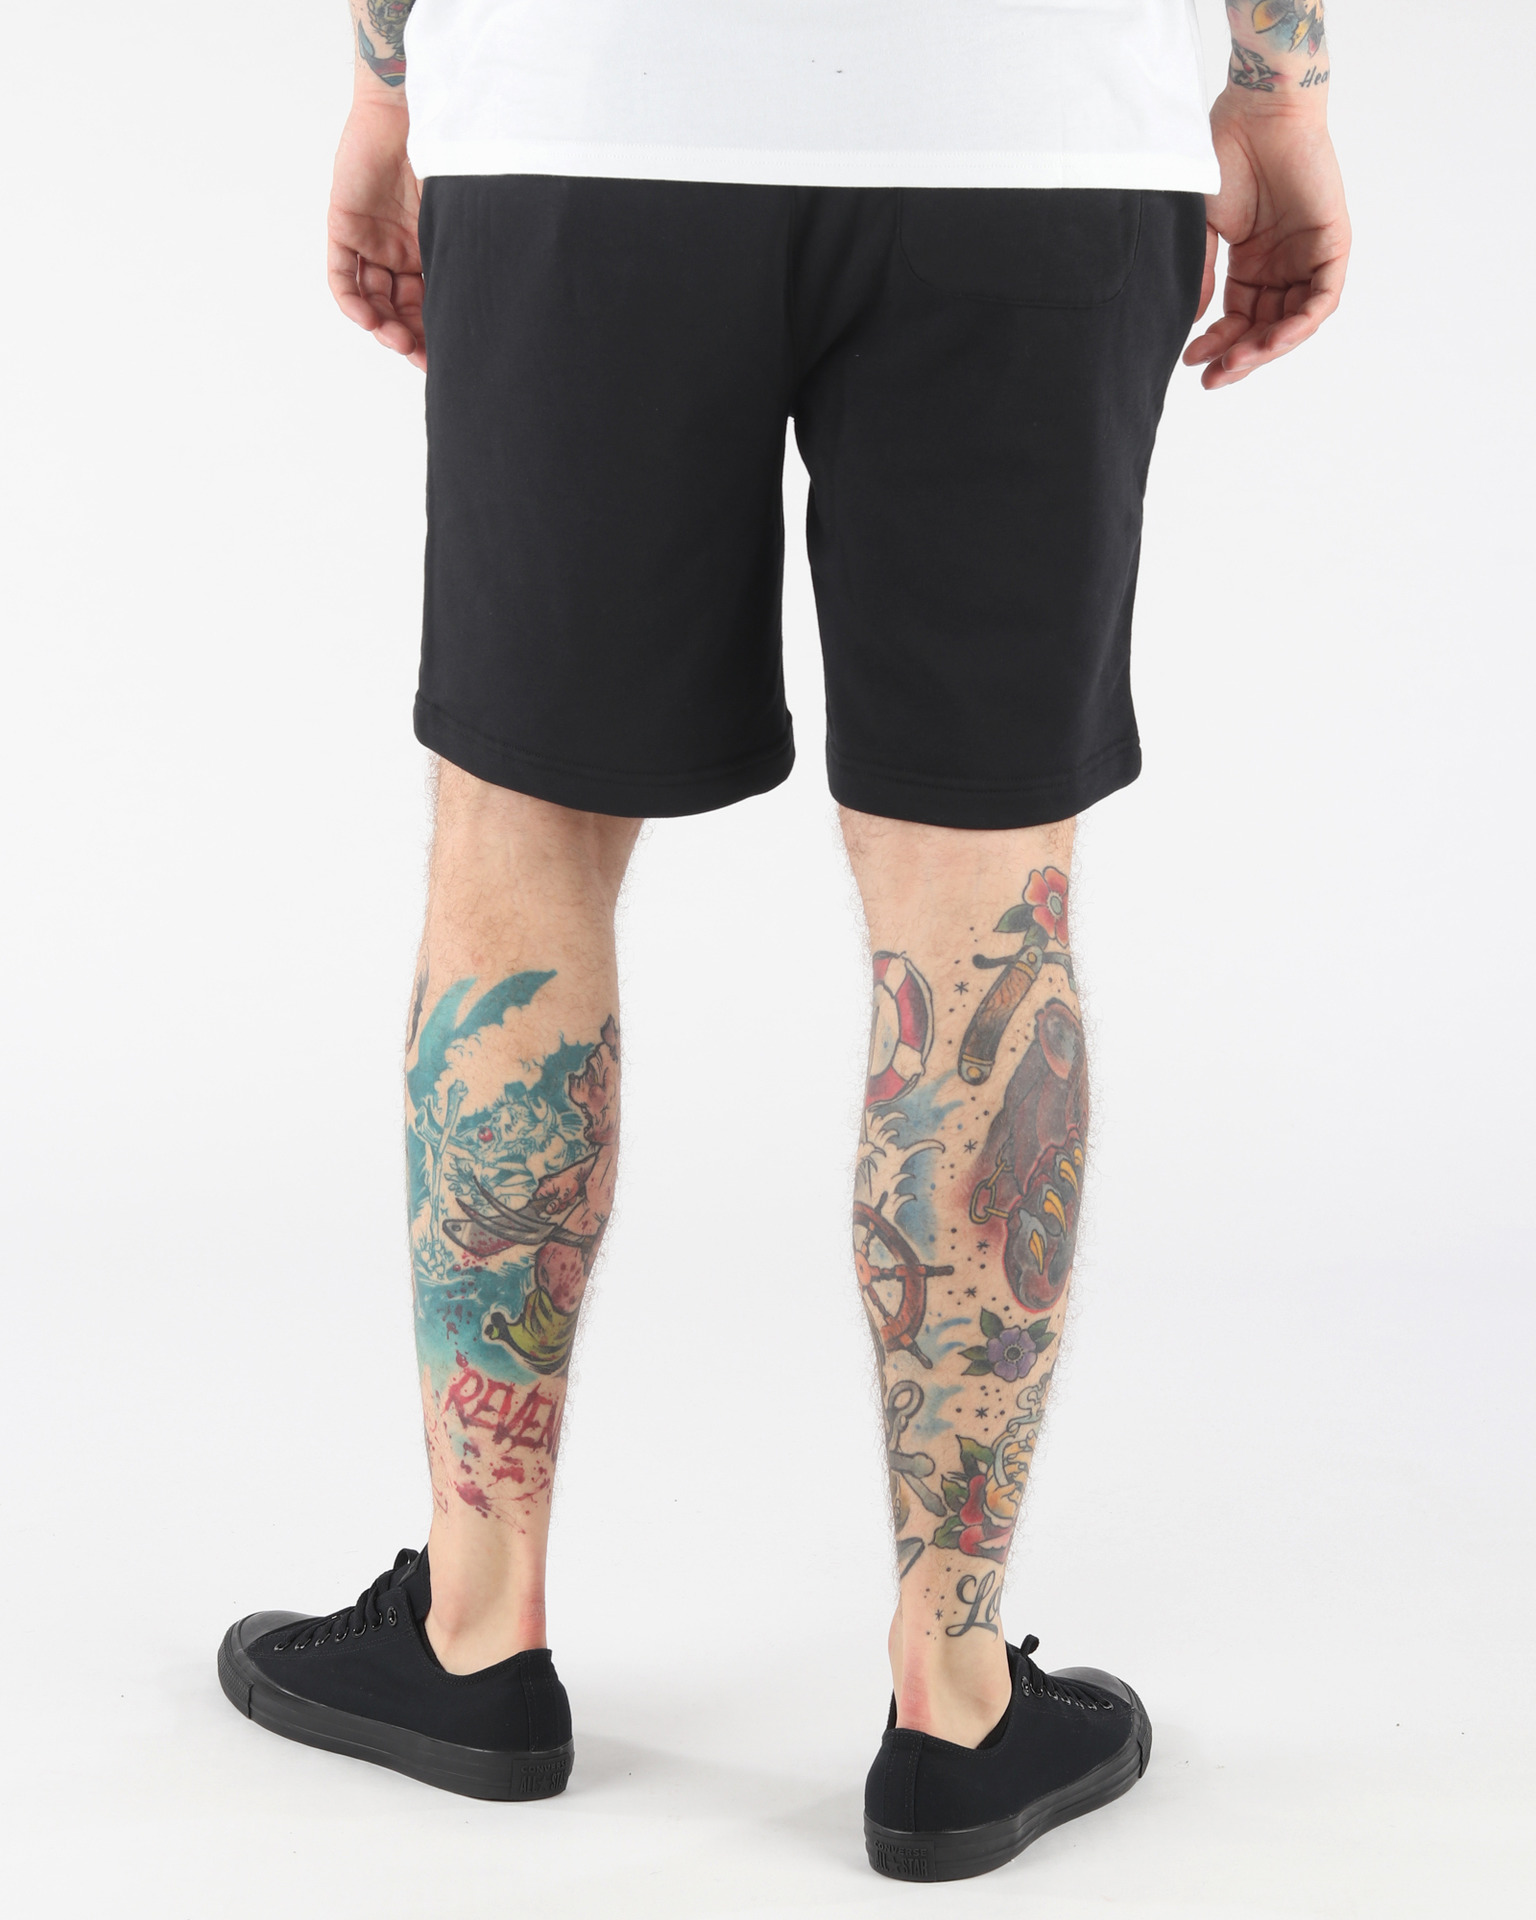 converse one star shorts